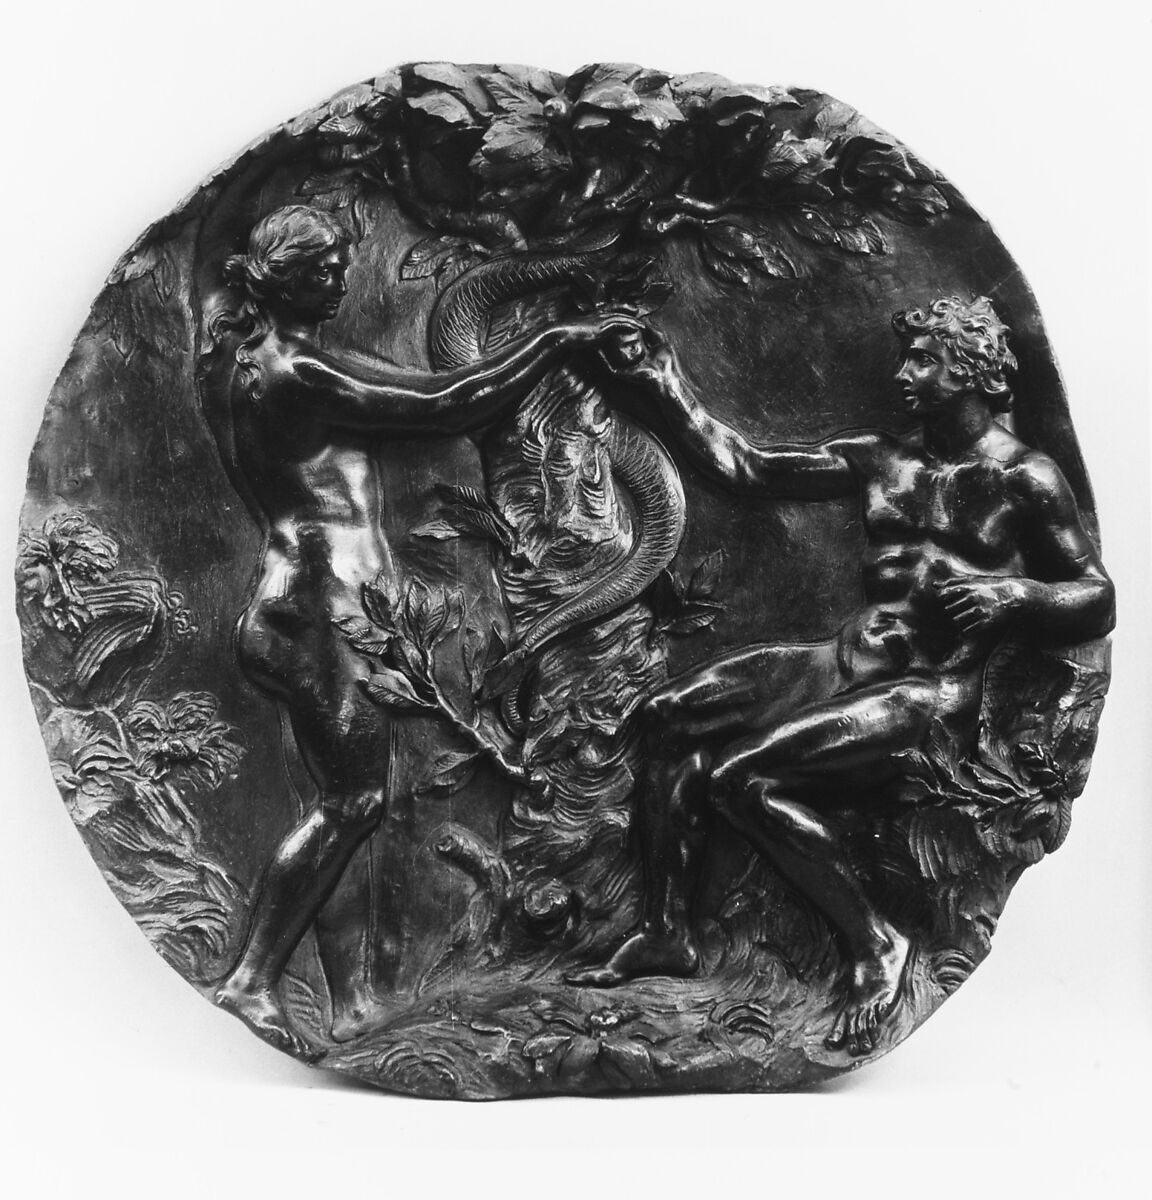 The Temptation of Adam and Eve, After a composition by Raphael (Raffaello Sanzio or Santi) (Italian, Urbino 1483–1520 Rome), Lead, cast and chased, covered with black lacquer, possibly Flemish 